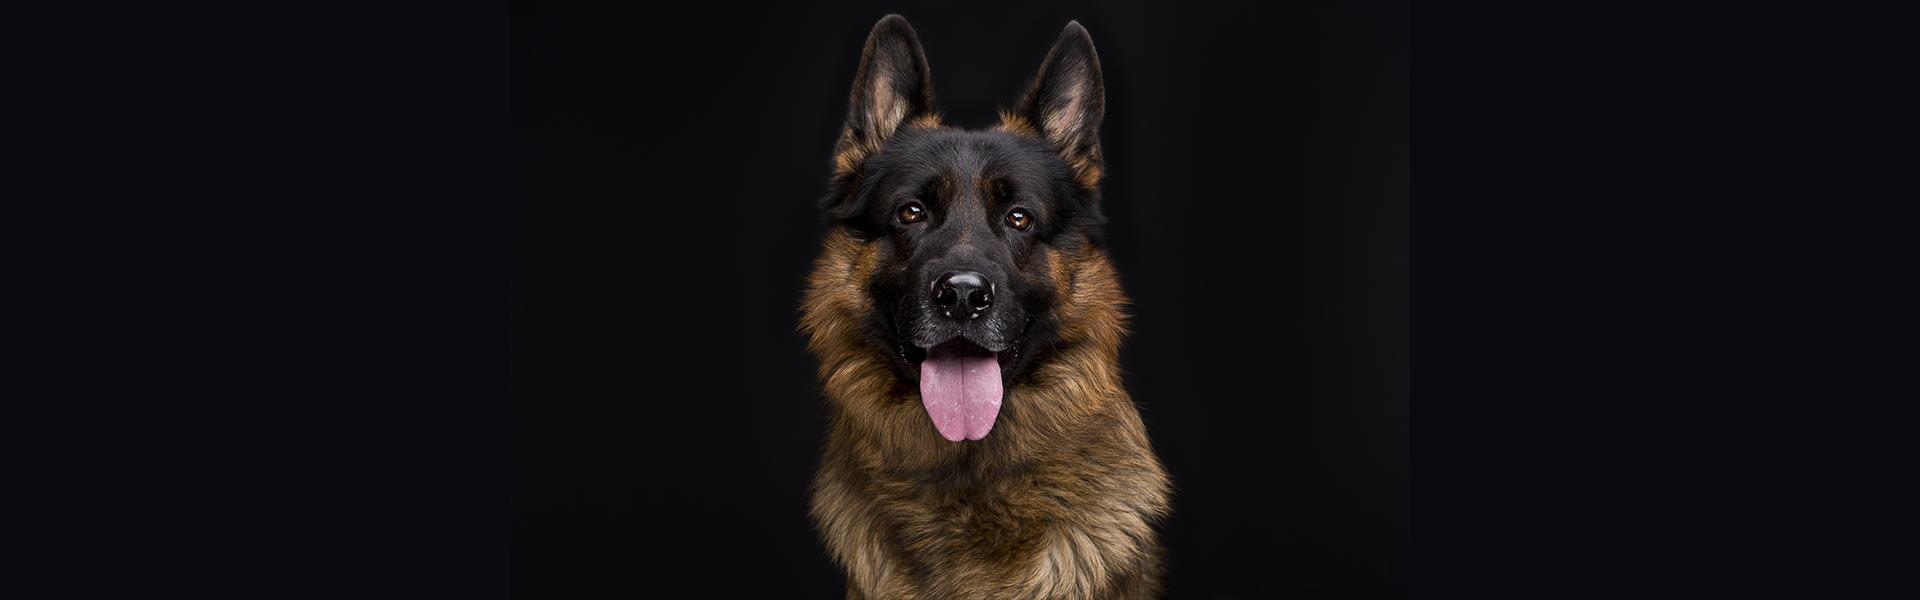 8 Fun Facts About German Shepherds You Probably Didn’t Know